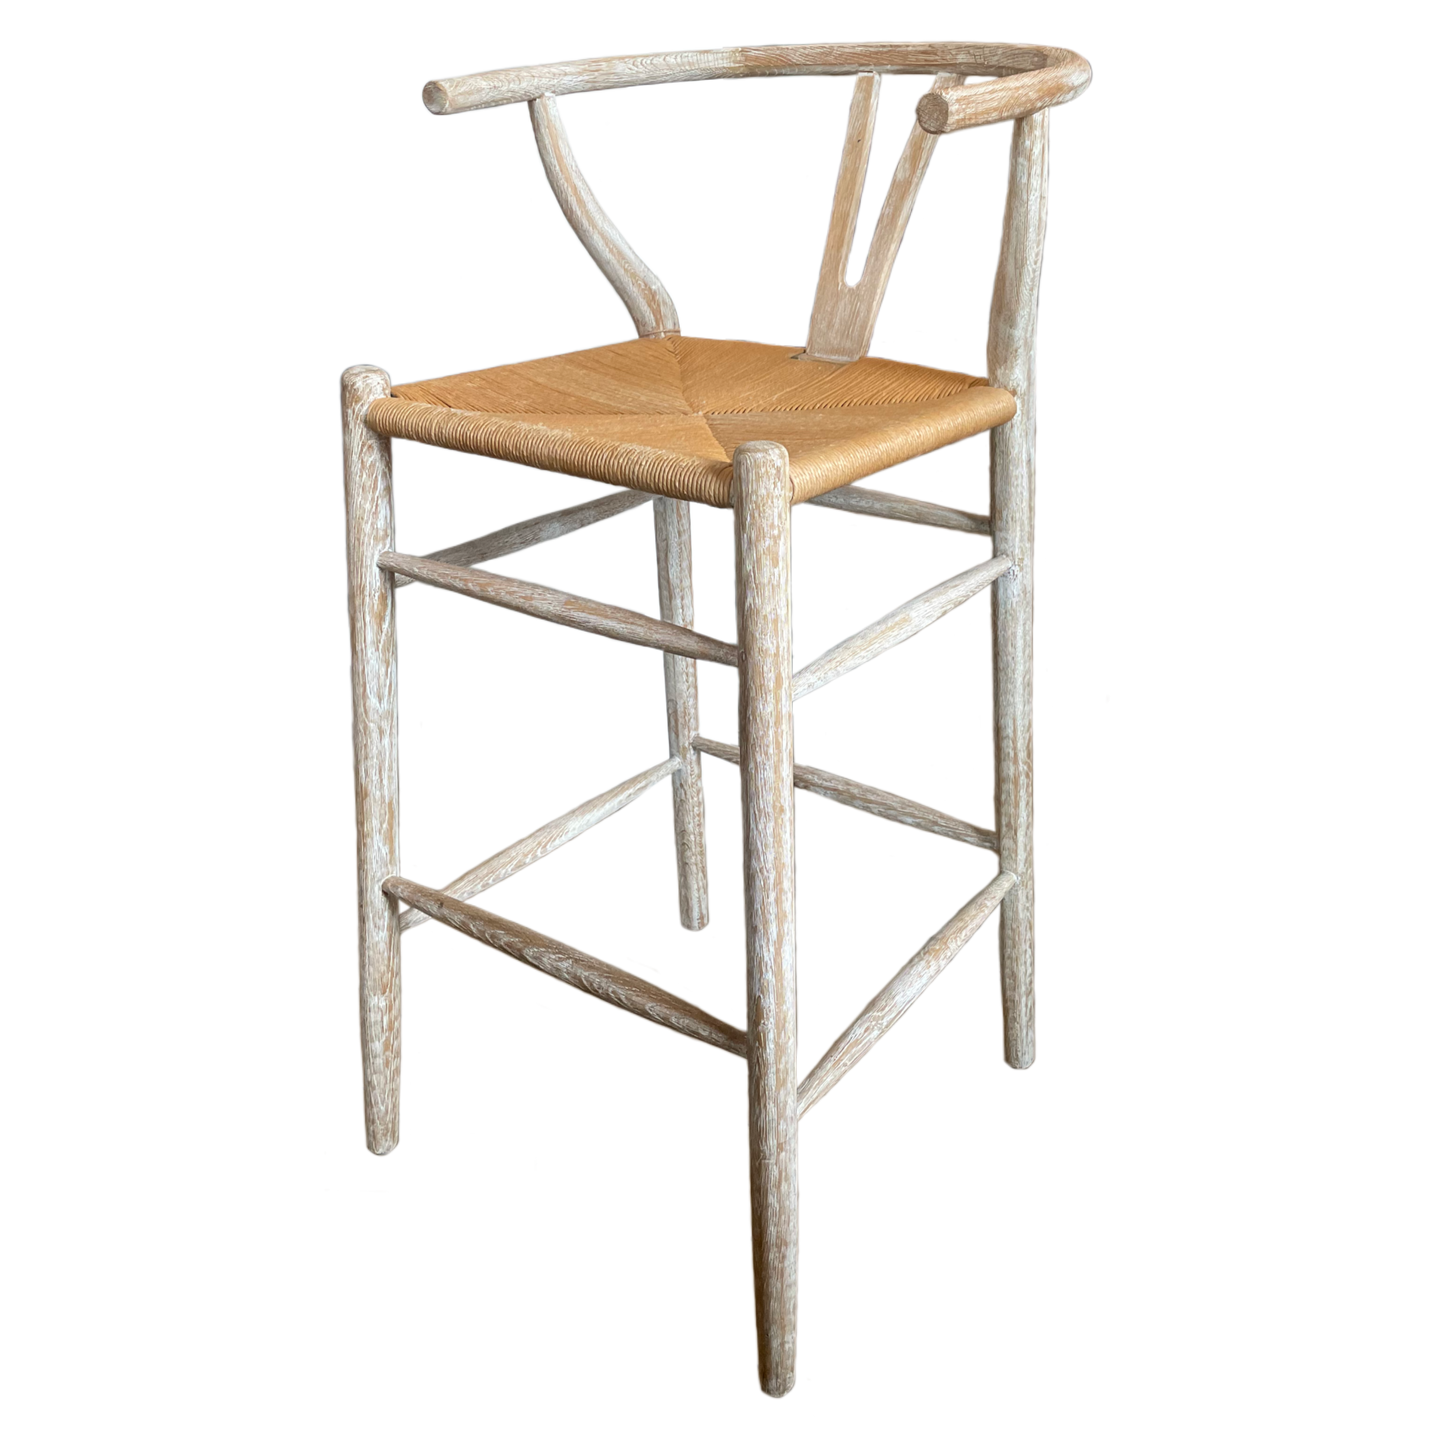 Rustic Wood & Woven Rope Stool